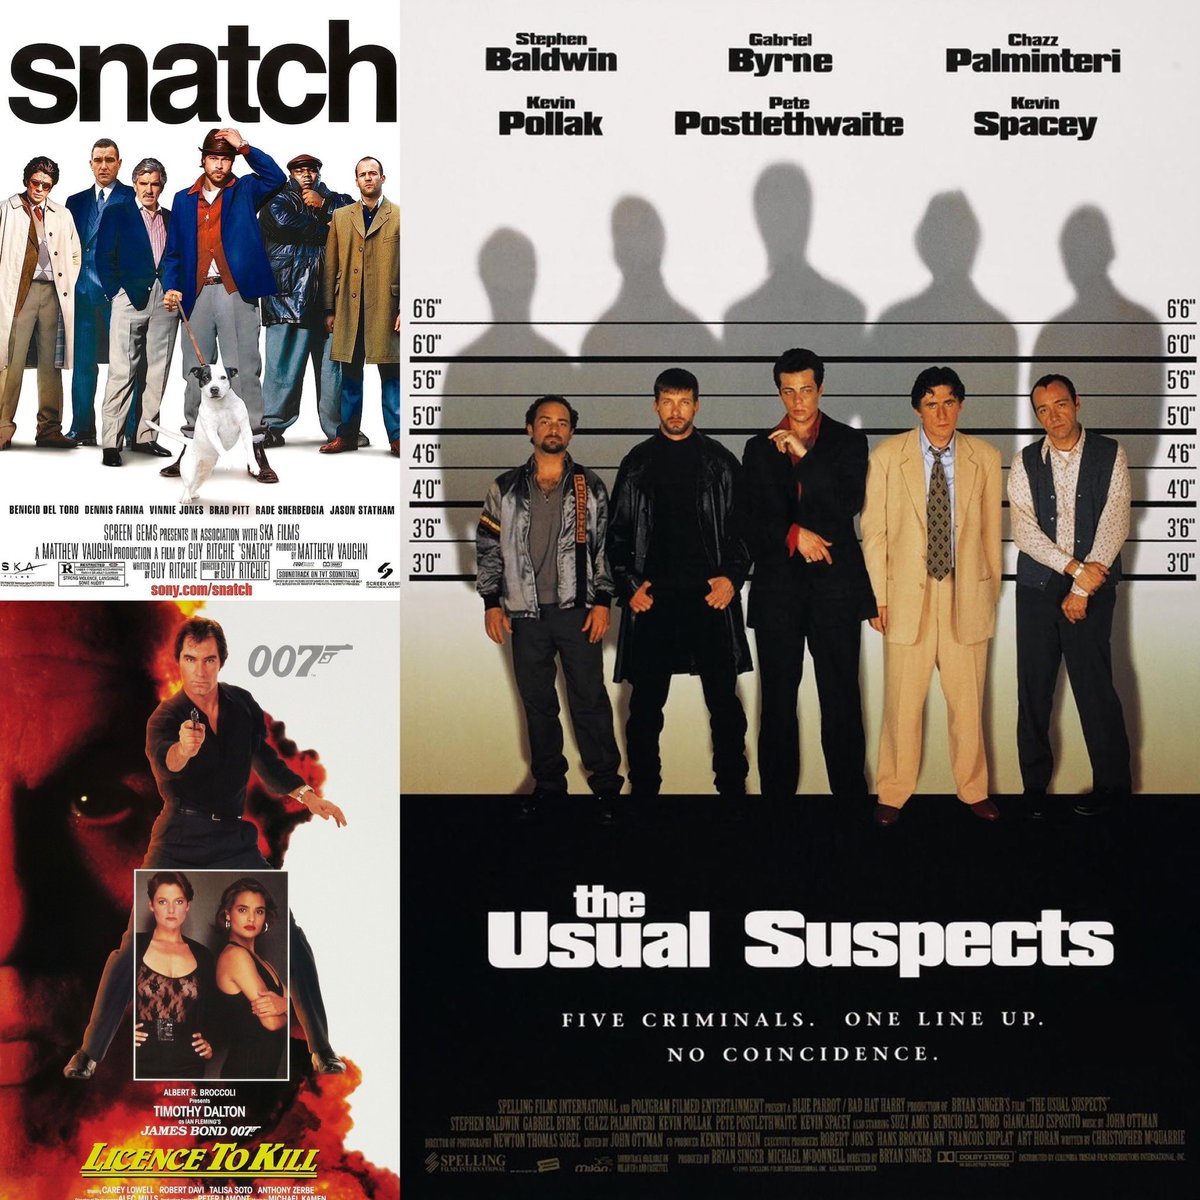 Movies at The Frisco Barroom today for Lunch, February 19th, 2024
1) Snatch (2000)
2) License to Kill (1989)
3) The Usual Suspects (1995)
#thefriscobarroom 
@Thefriscostl
#BeniciodelToro 
#HappyBirthdayBeniciodelToro
#snatch #theusualsuspects
#licensetokill